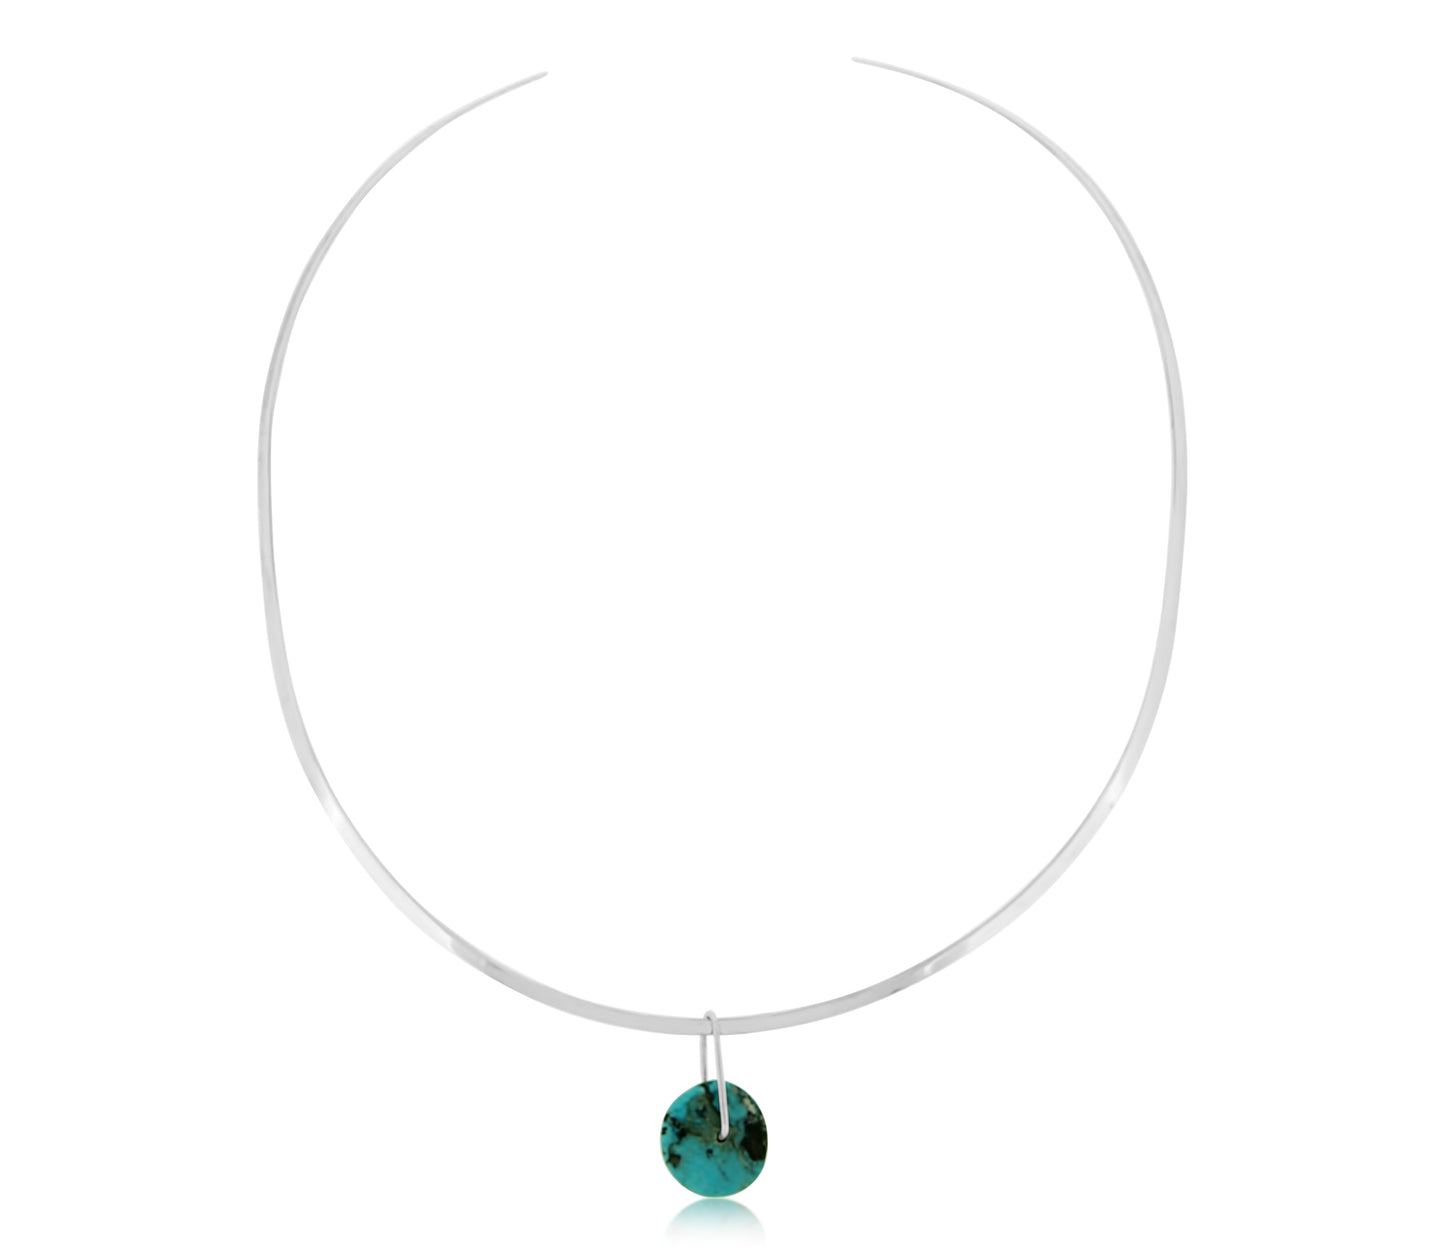 Turquoise Disc Silver Collar